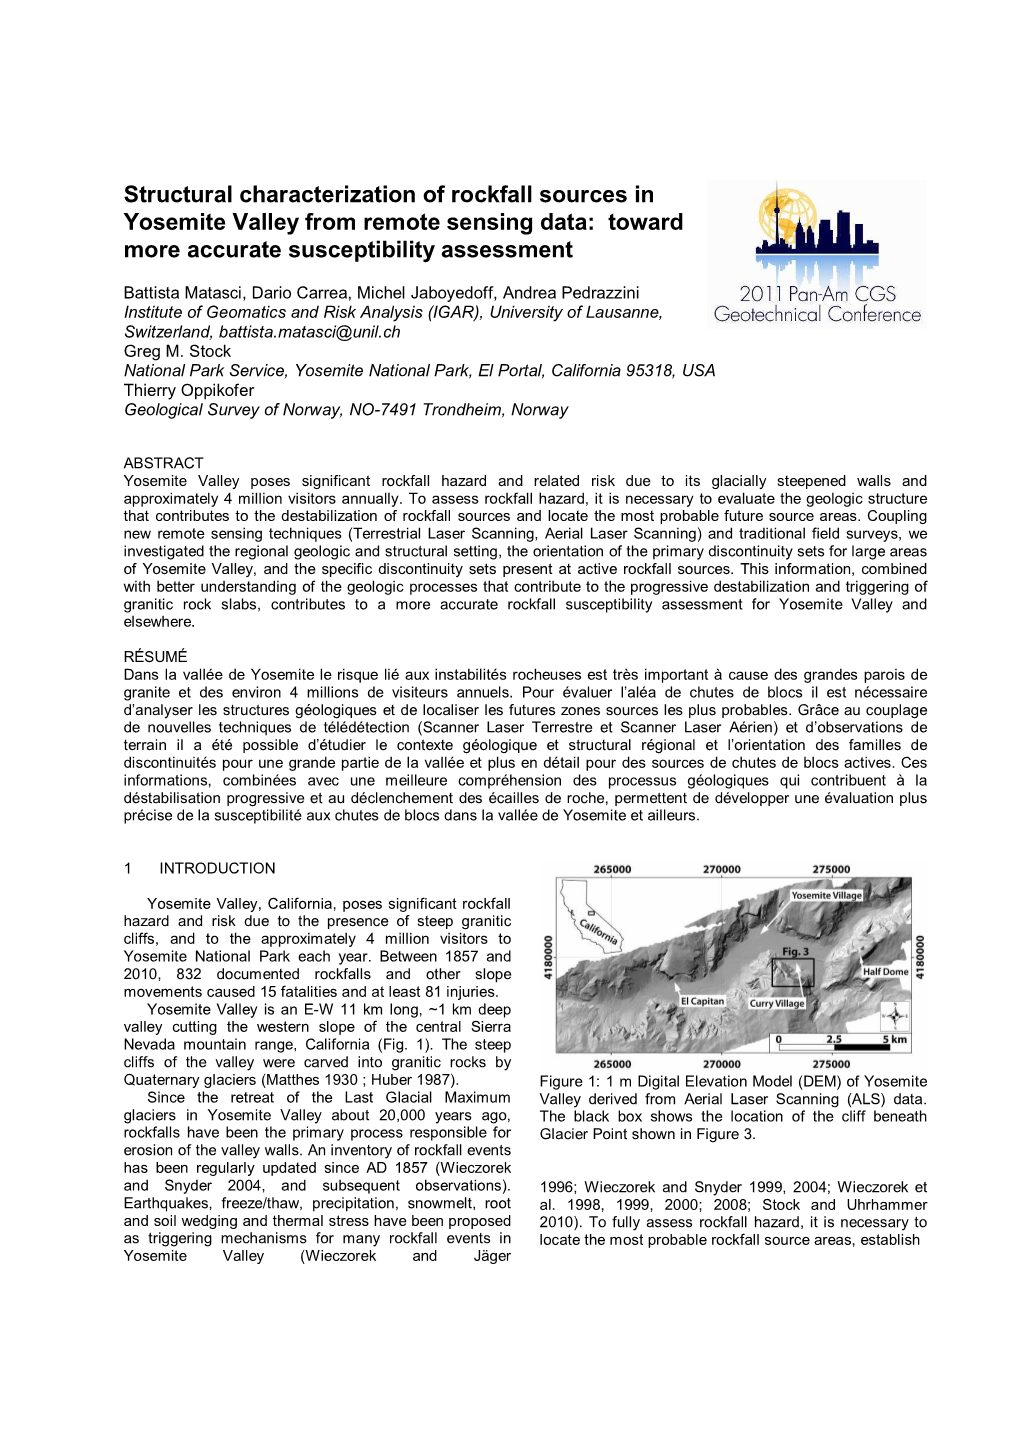 Structural Characterization of Rockfall Sources in Yosemite Valley from Remote Sensing Data: Toward More Accurate Susceptibility Assessment